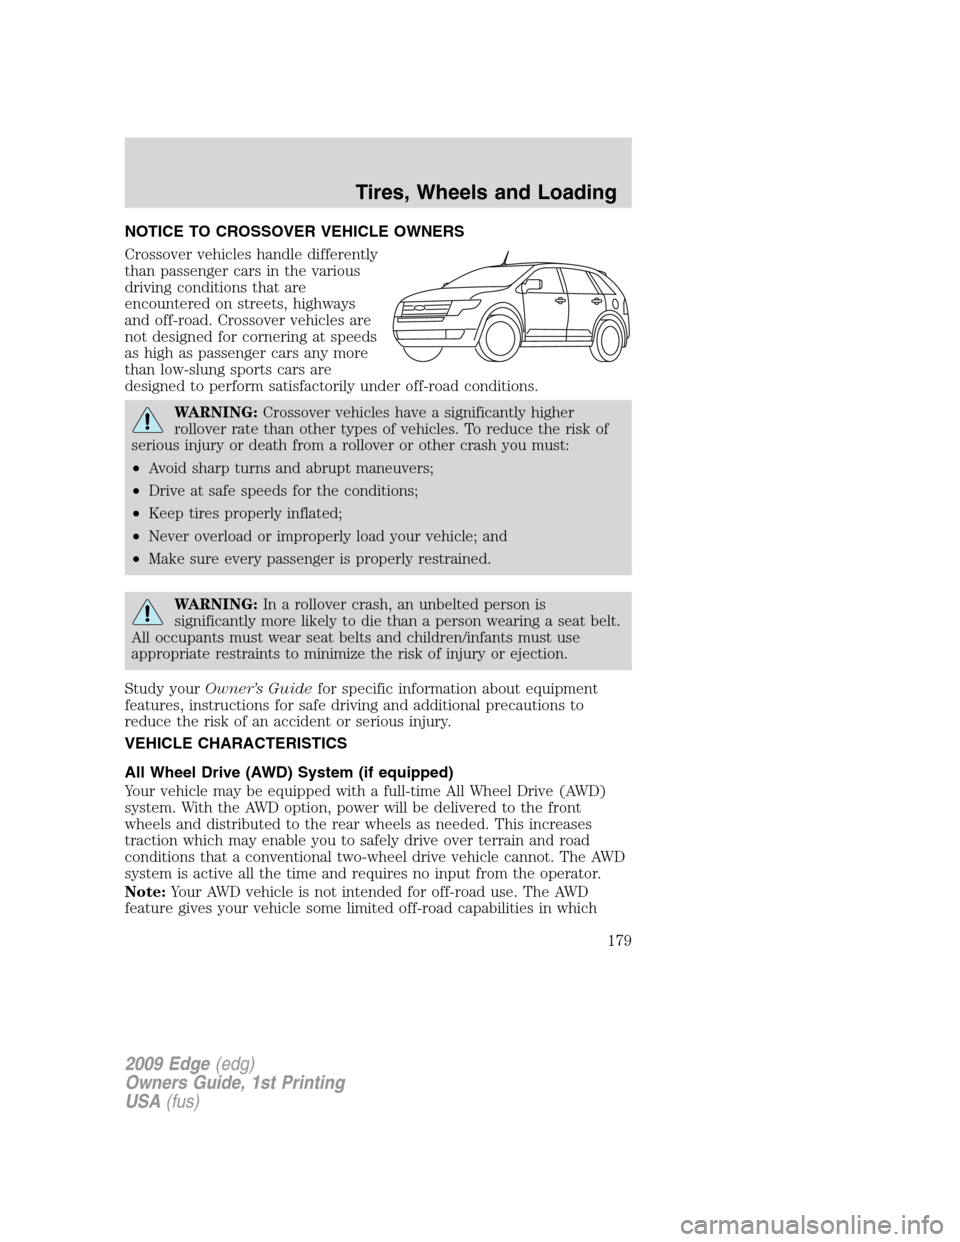 FORD EDGE 2009 1.G Owners Manual NOTICE TO CROSSOVER VEHICLE OWNERS
Crossover vehicles handle differently
than passenger cars in the various
driving conditions that are
encountered on streets, highways
and off-road. Crossover vehicle